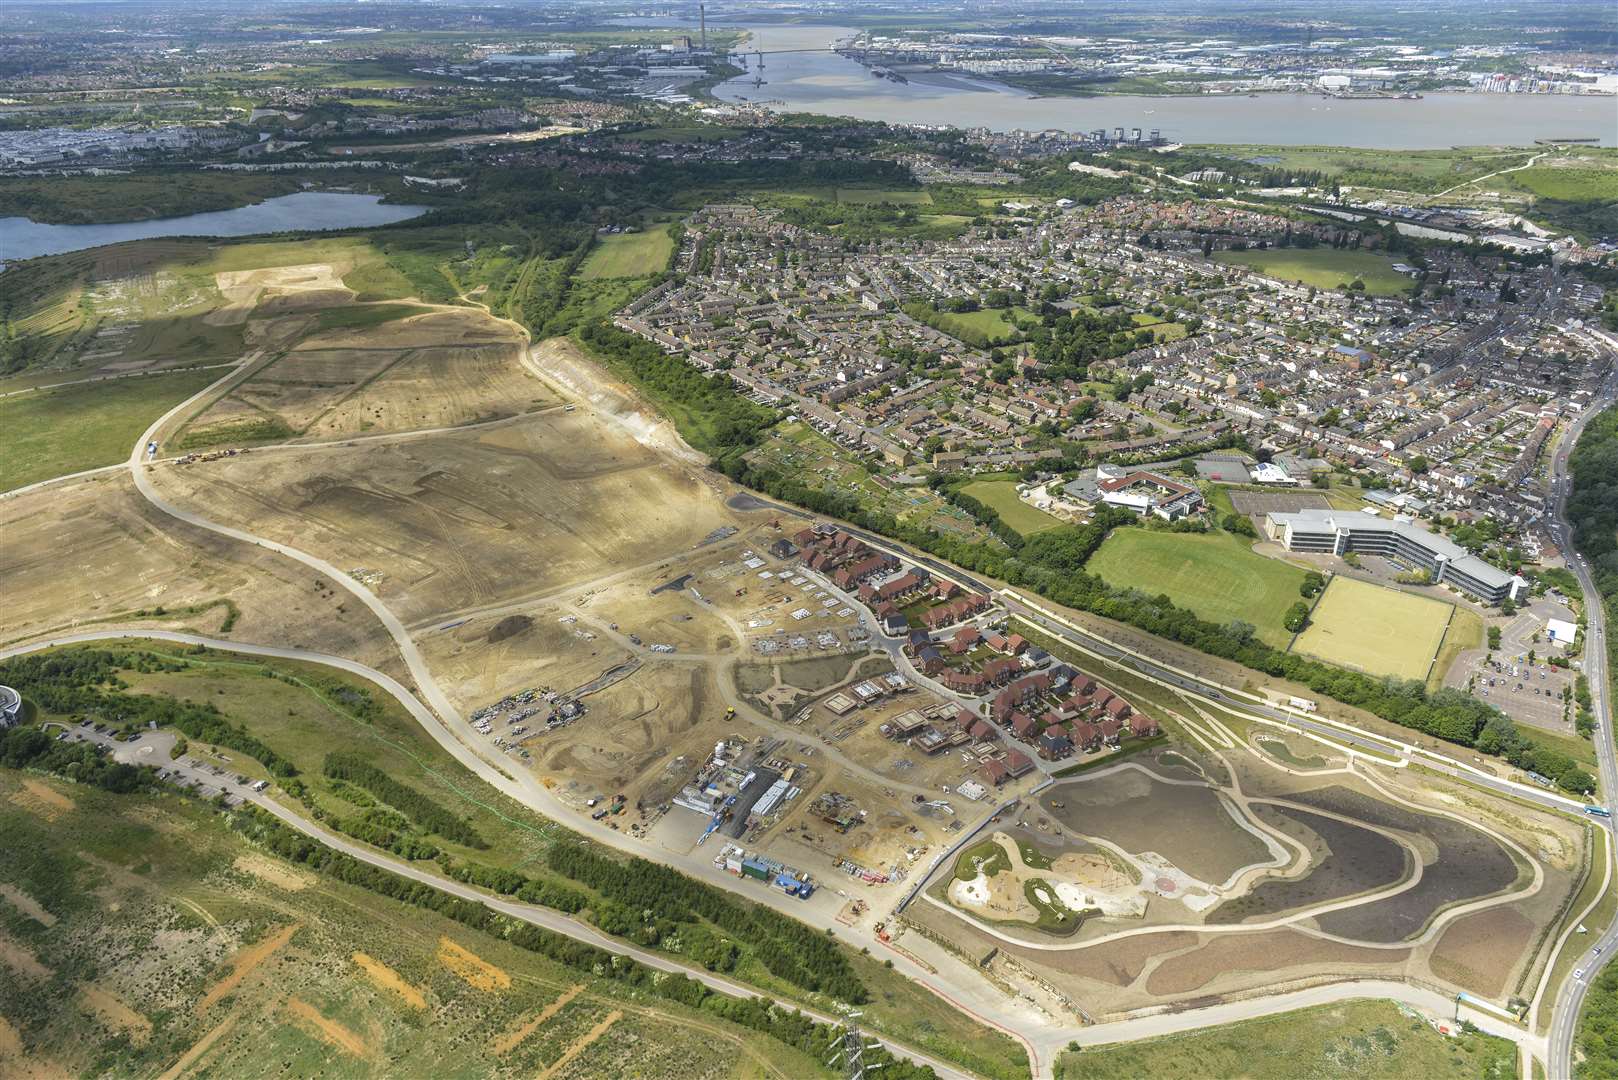 The Eastern Quarry at Ebbsfleet Garden City where more than 15,000 homes are expected to be built.